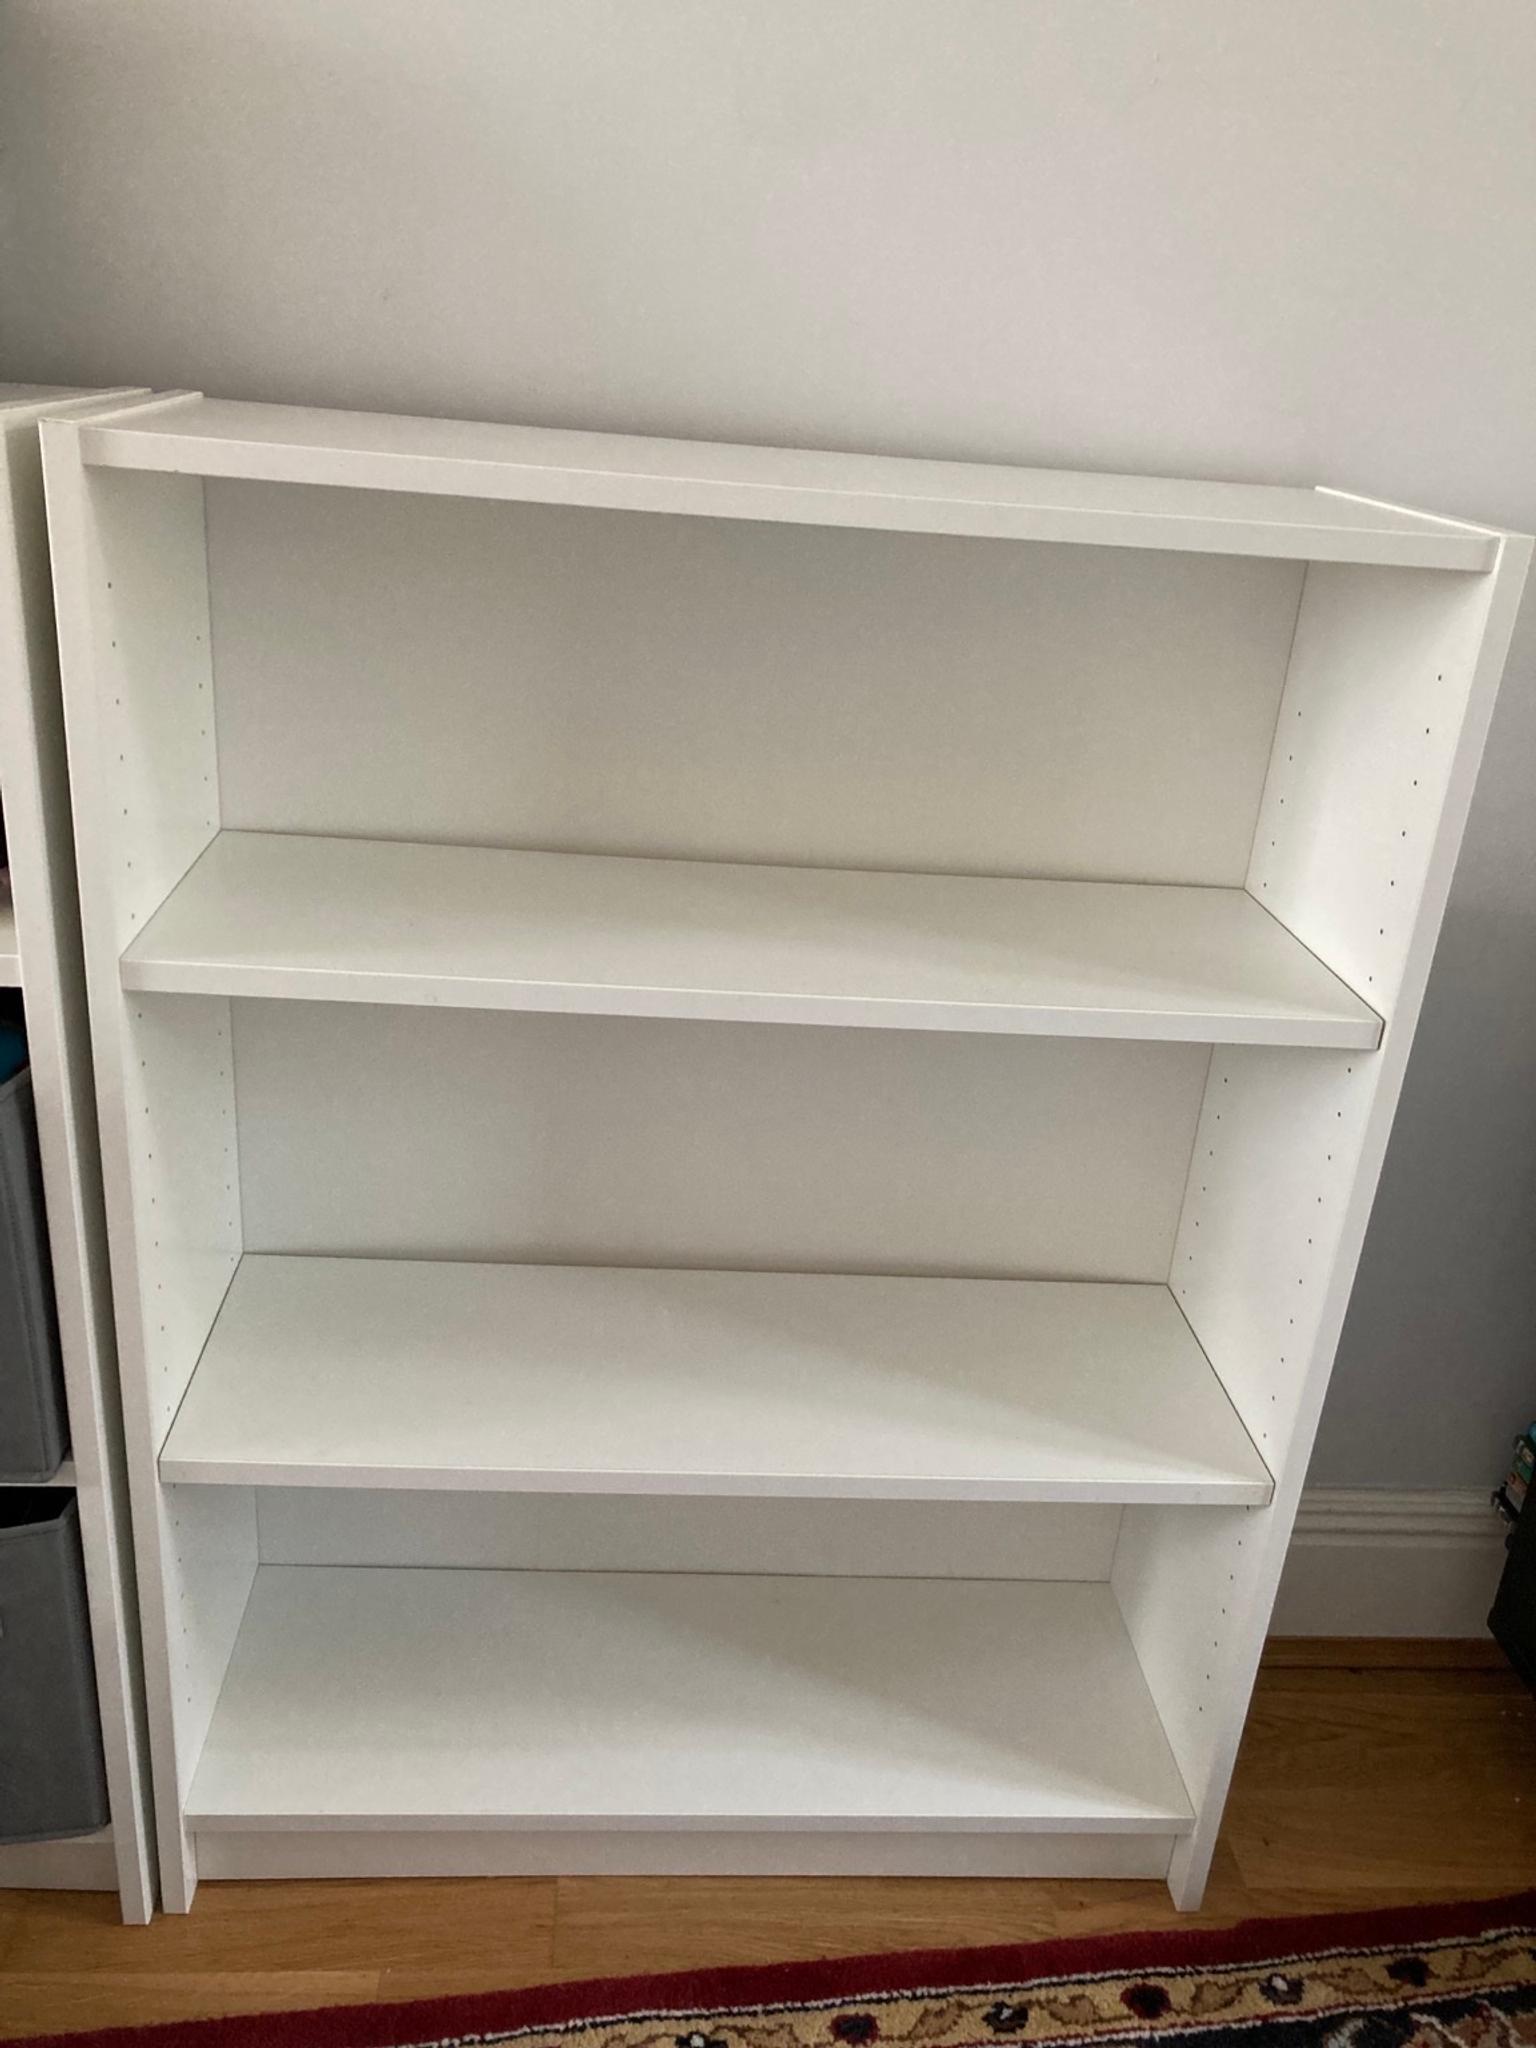 3 X Ikea Billy Bookcase White Make An, Billy Bookcase Review